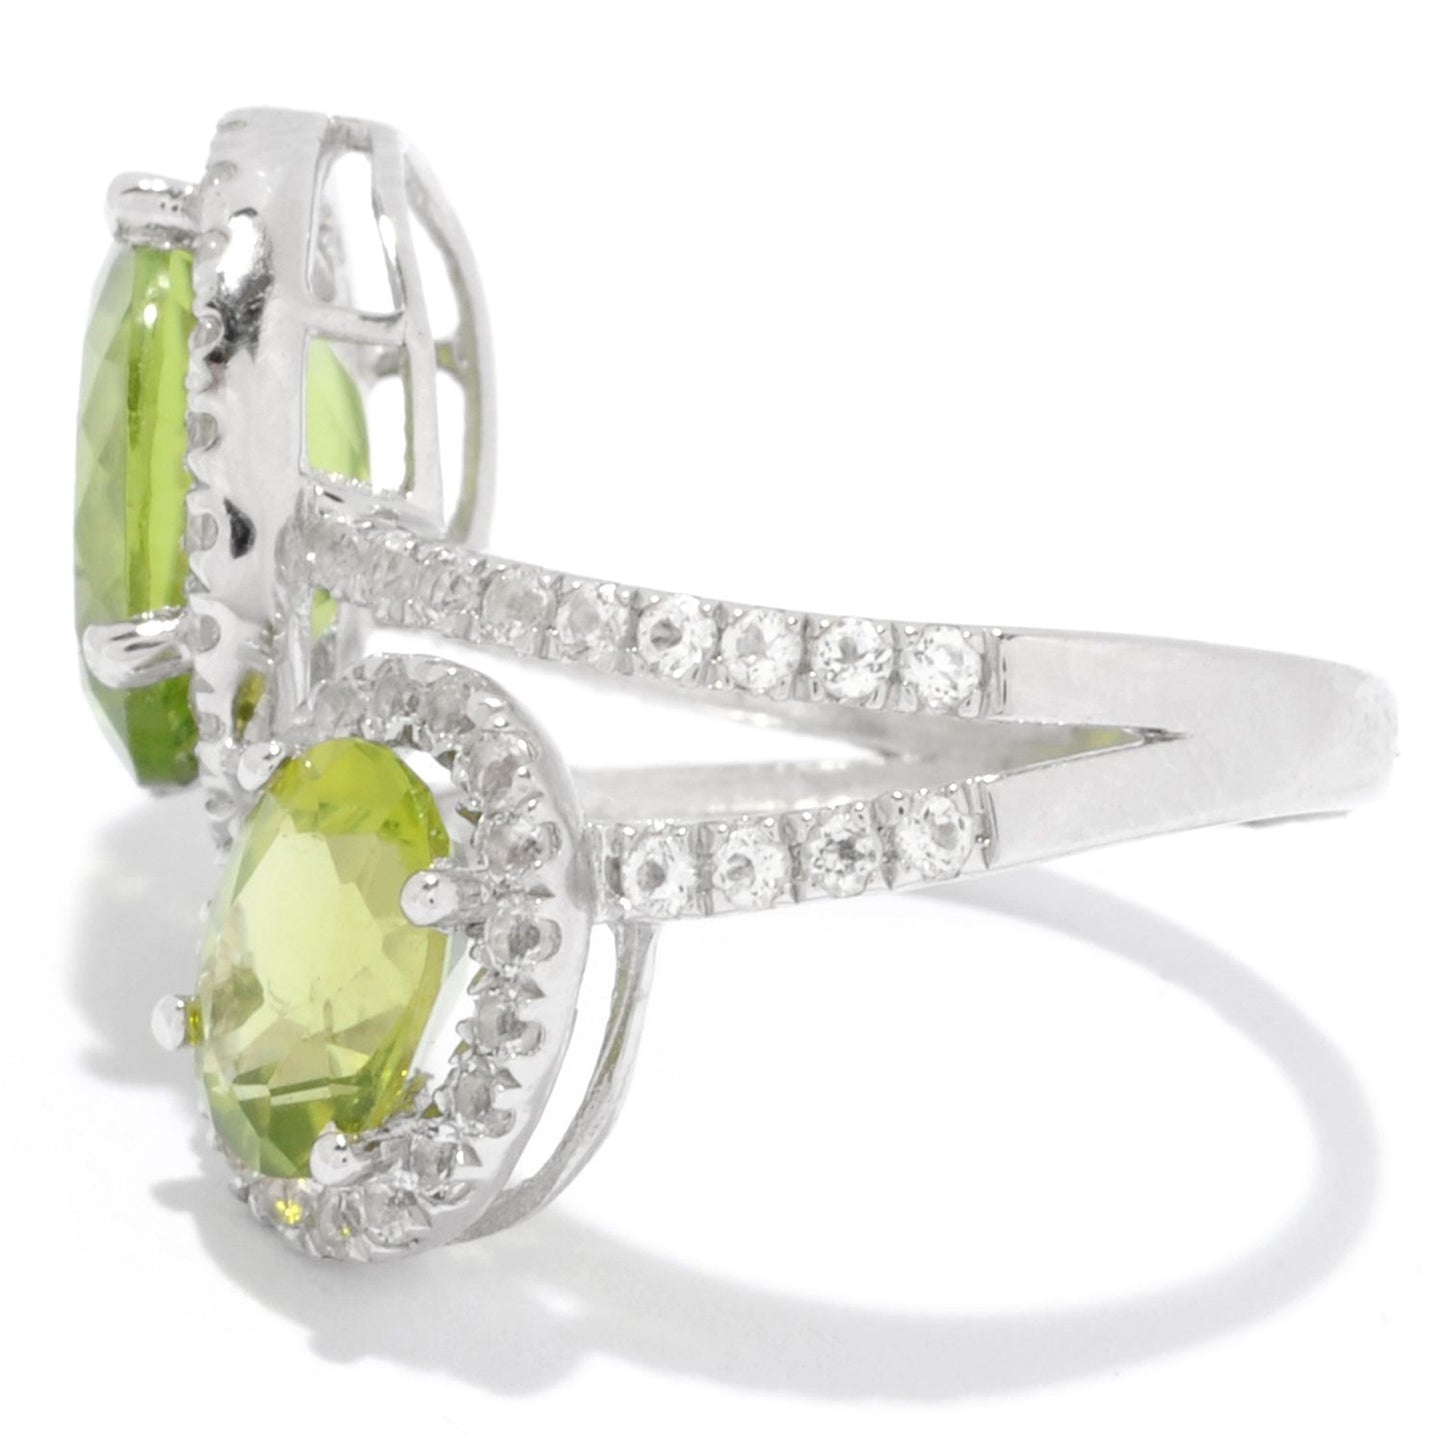 Pinctore Sterling Silver Oval 5.7ctw Peridot & White Topaz Double Halo Ring, Size 7